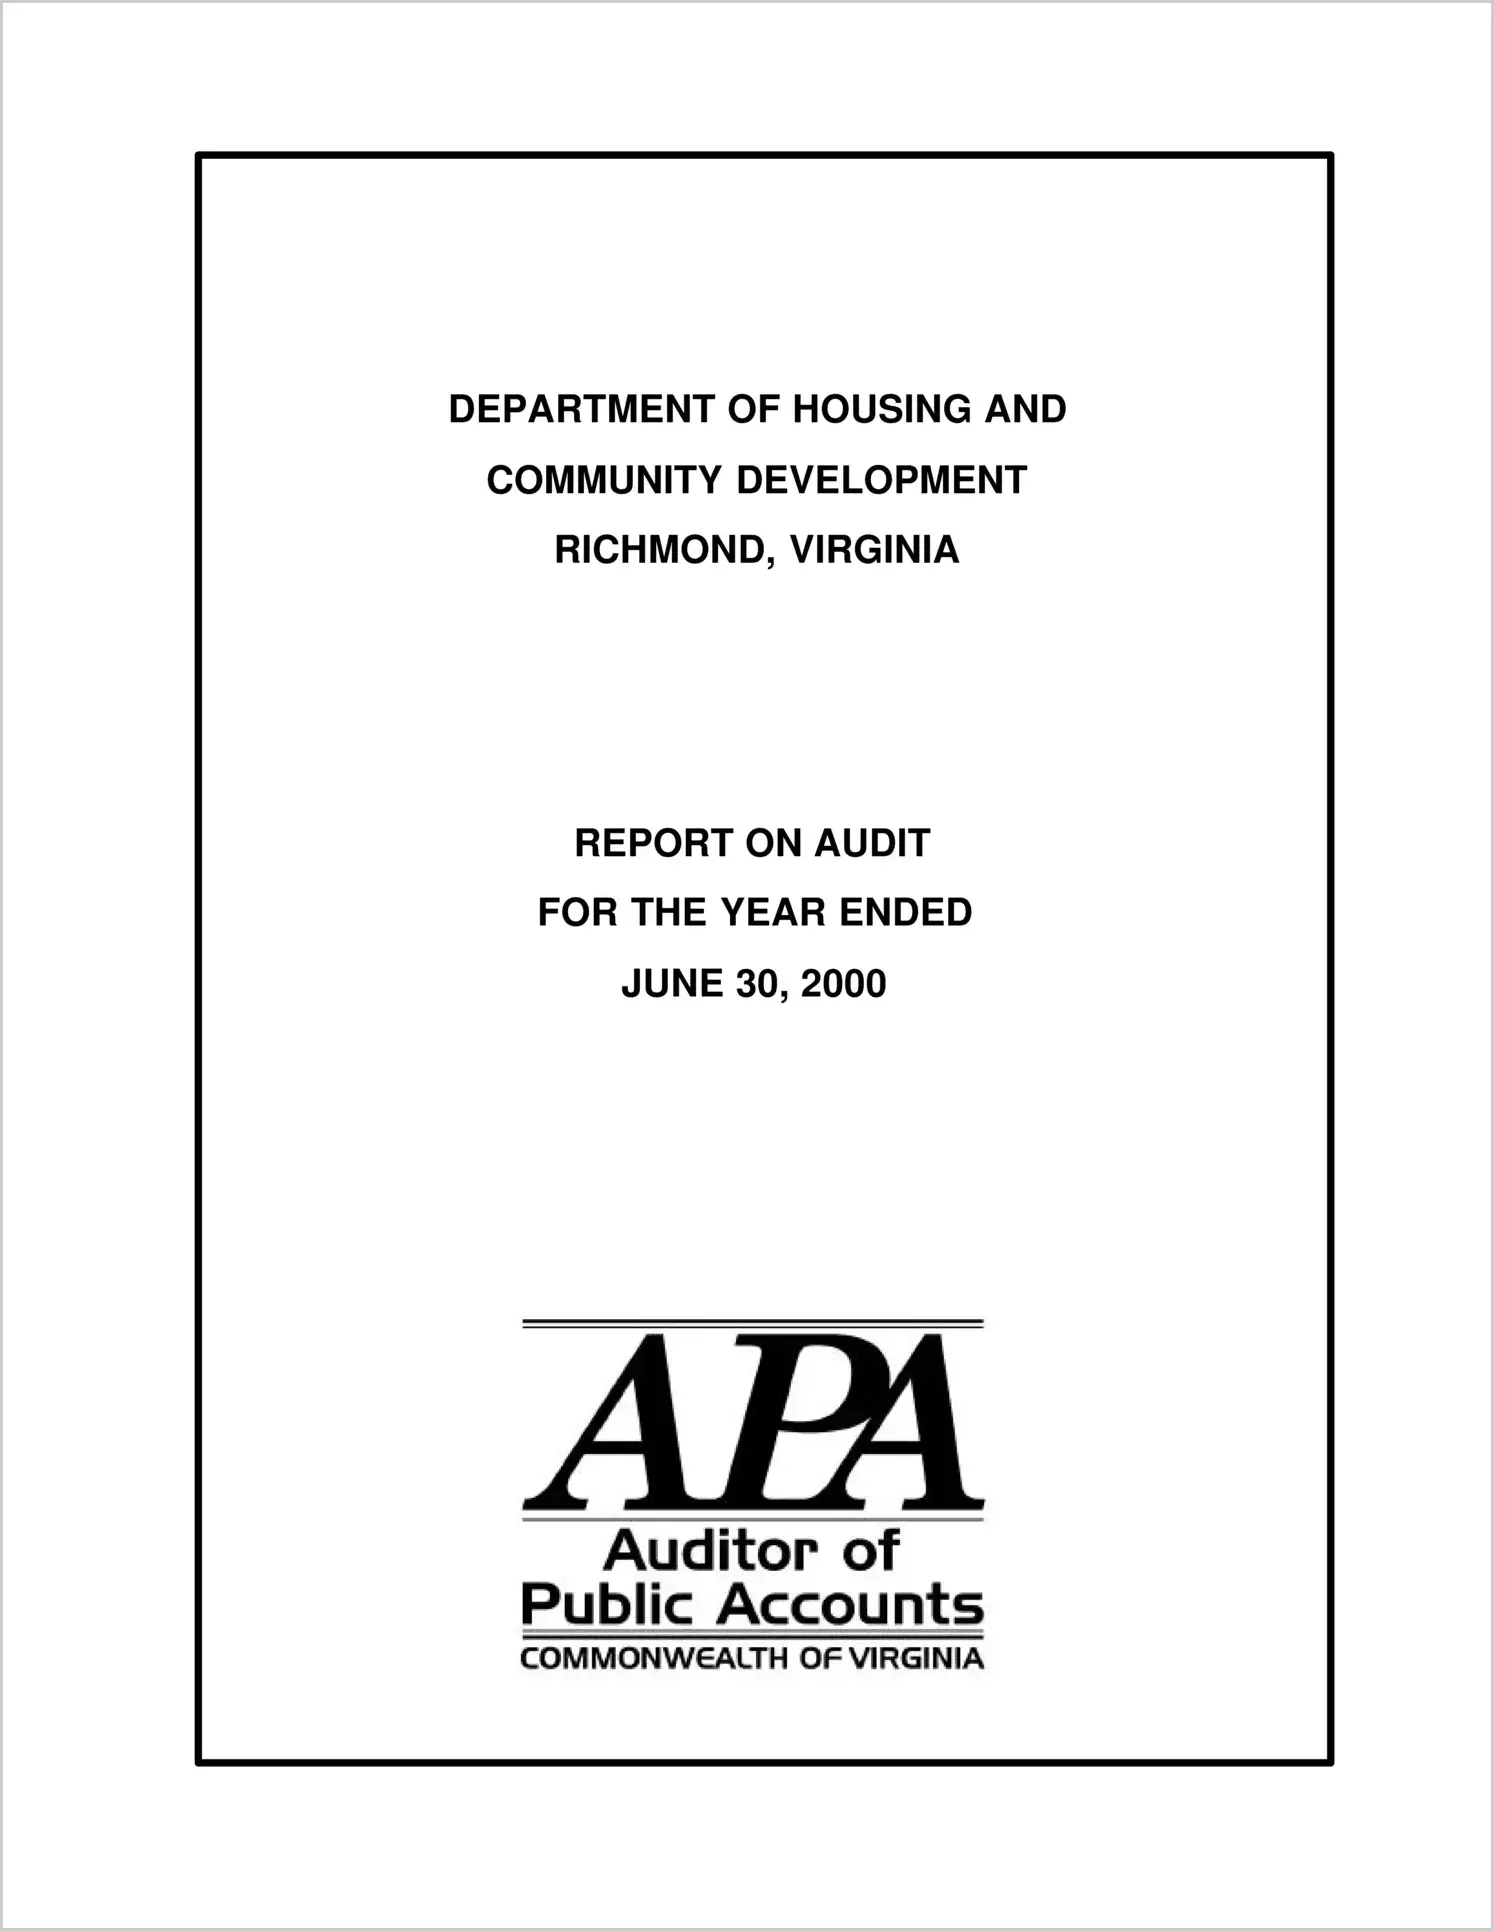 Department of Housing and Community Development for the year ended June 30, 2000